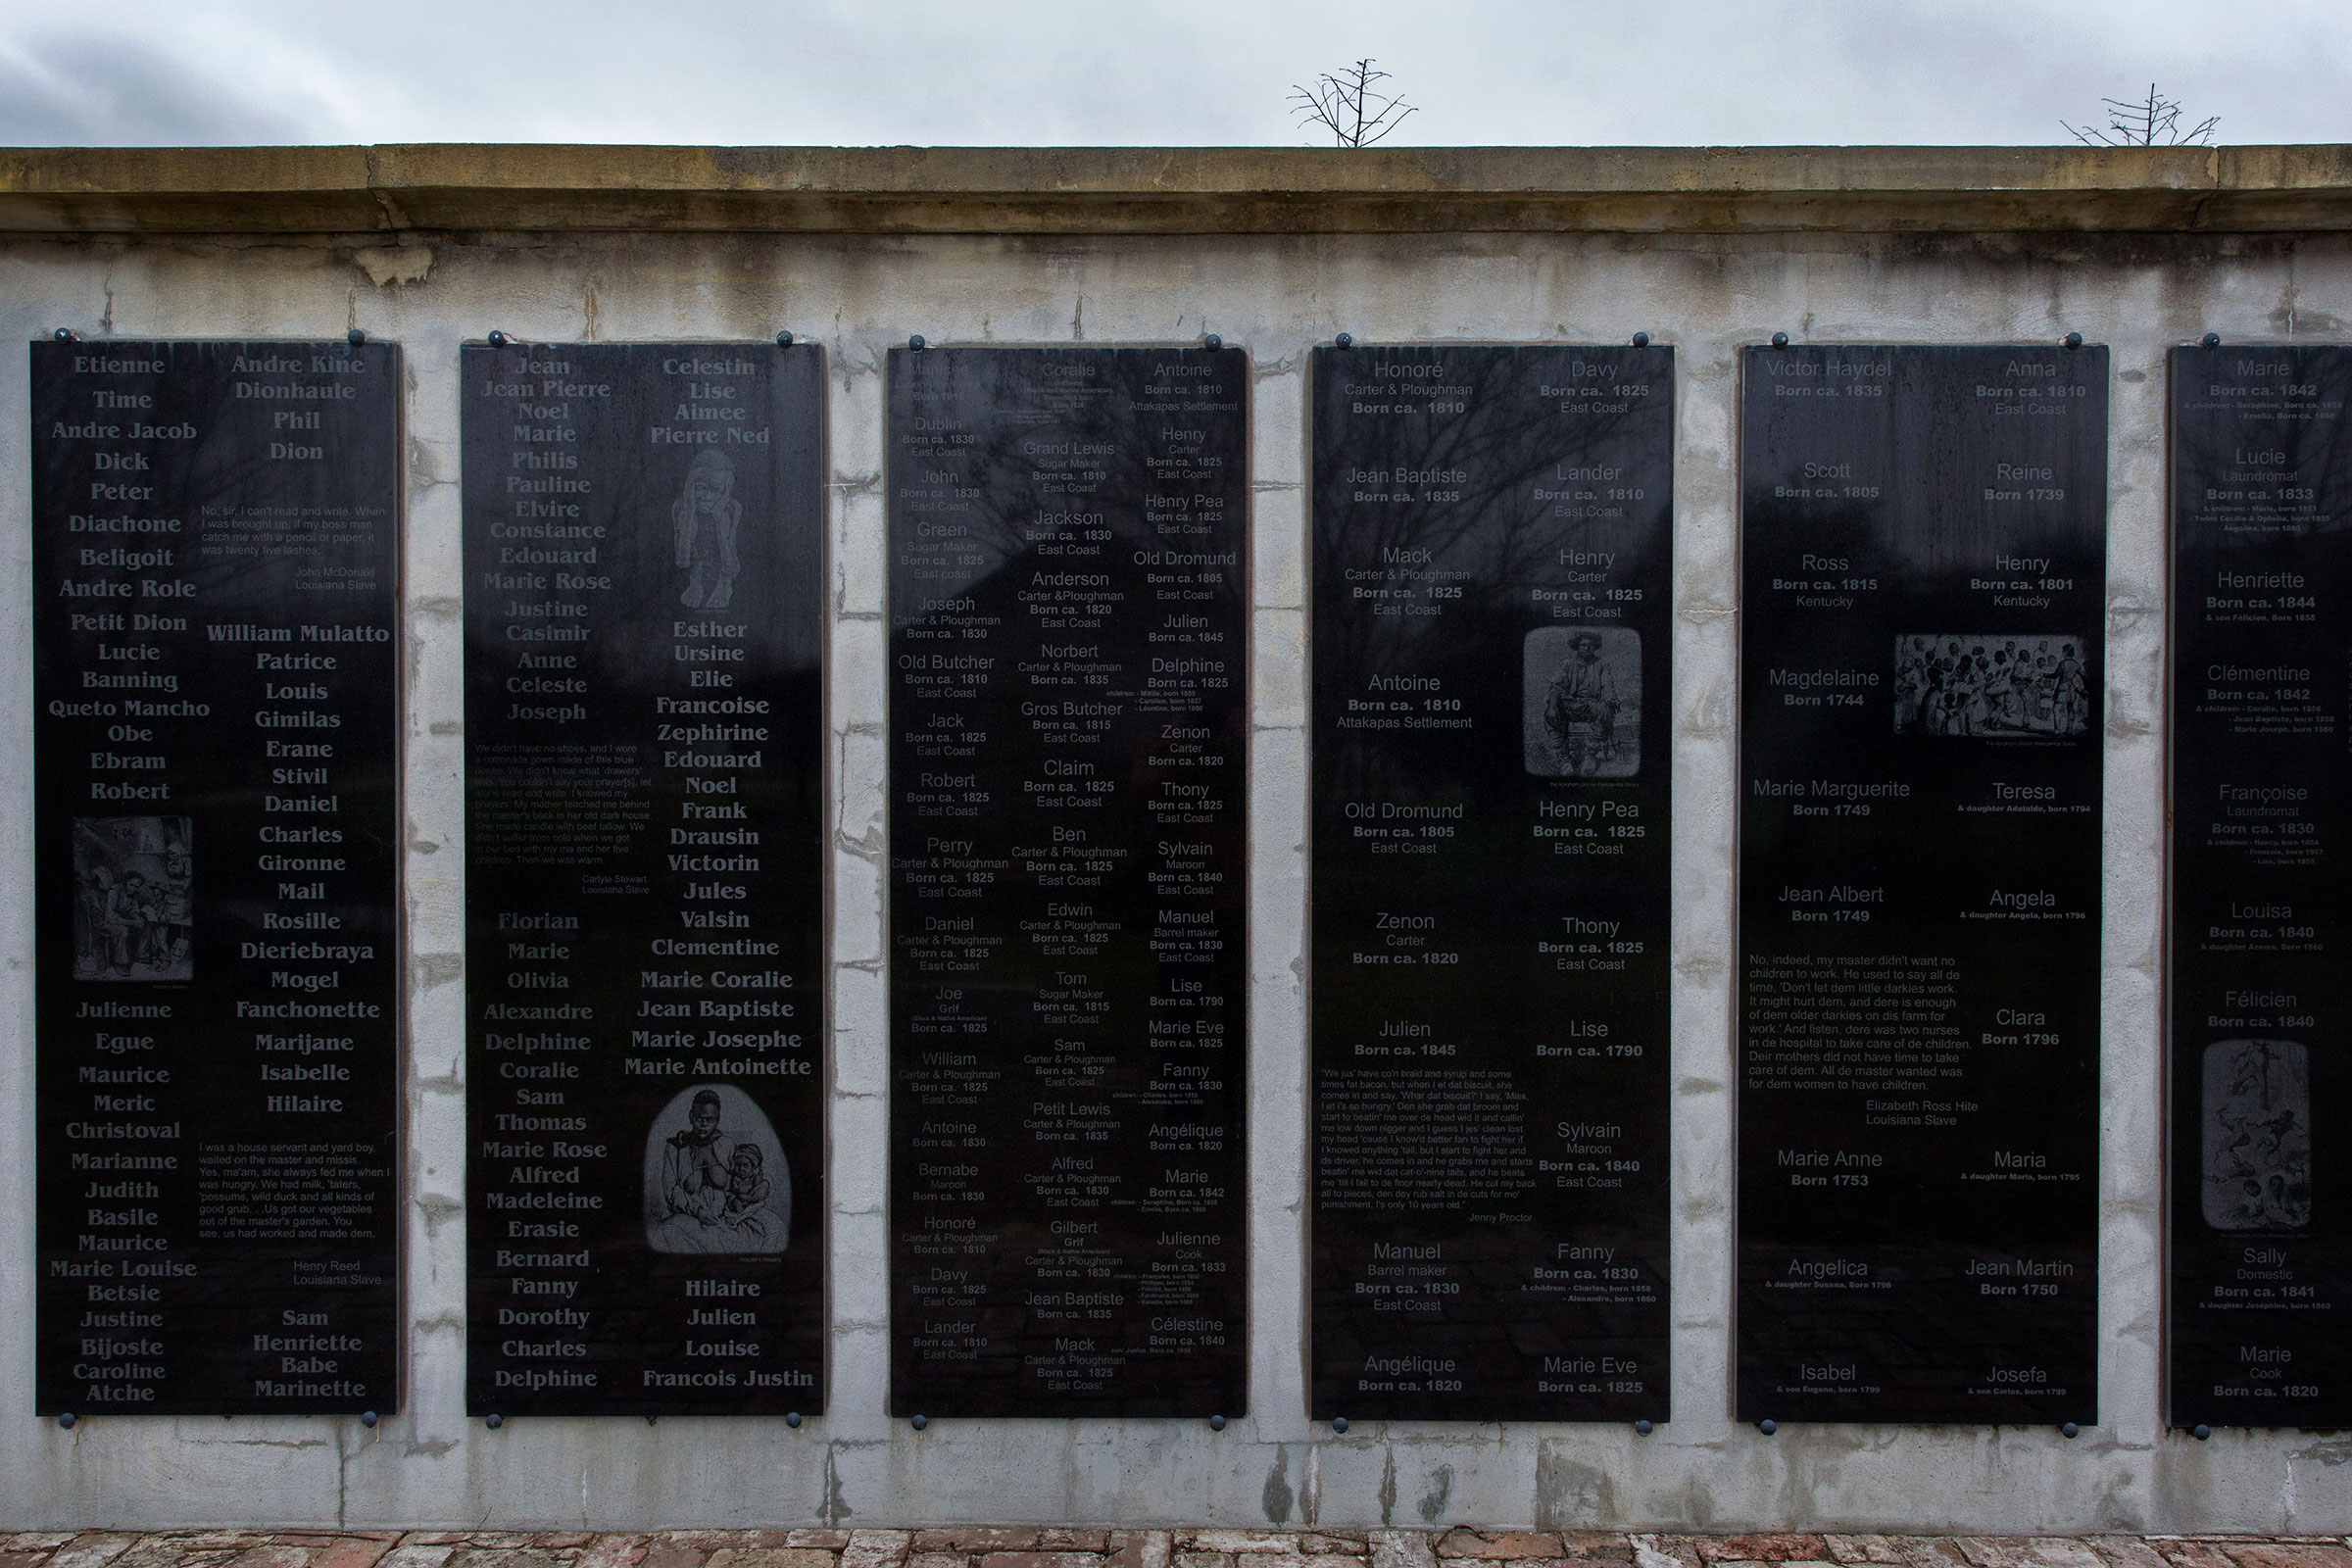 A memorial wall at the Whitney Plantation with the names of slaves who were at the plantation in Wallace, Louisiana